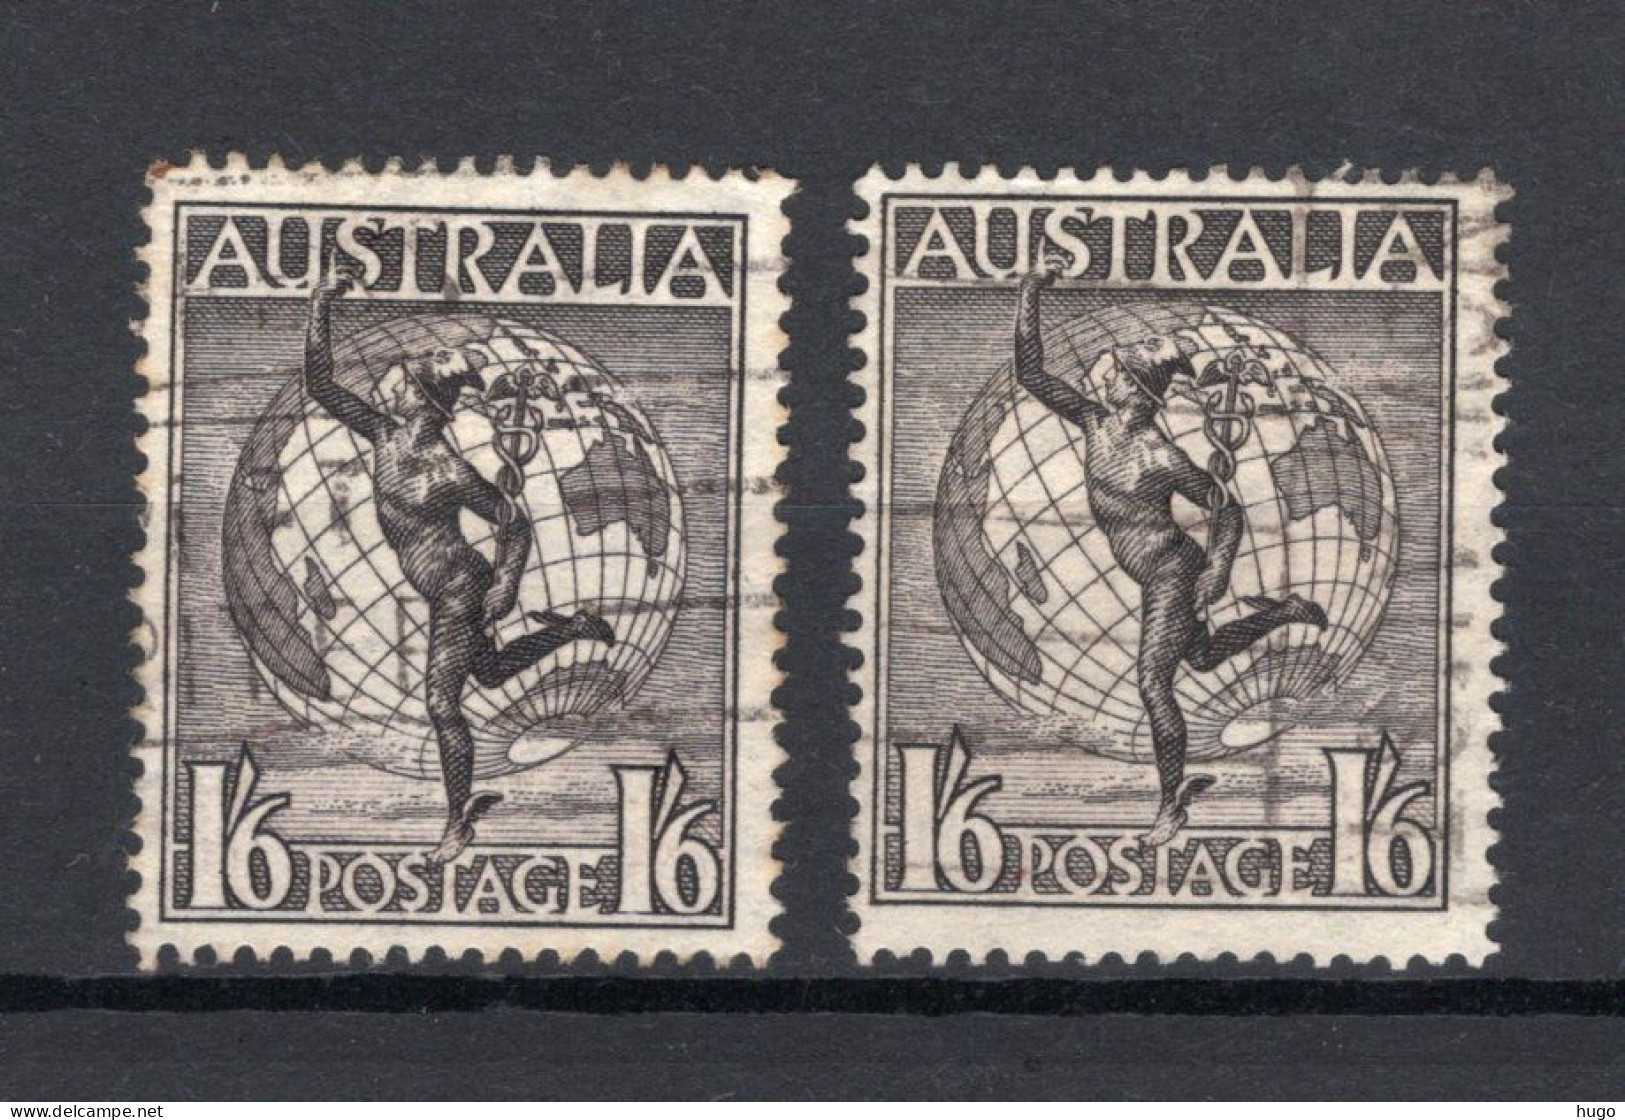 AUSTRALIA Yt. PA8° Gestempeld Luchtpost 1956 - Used Stamps